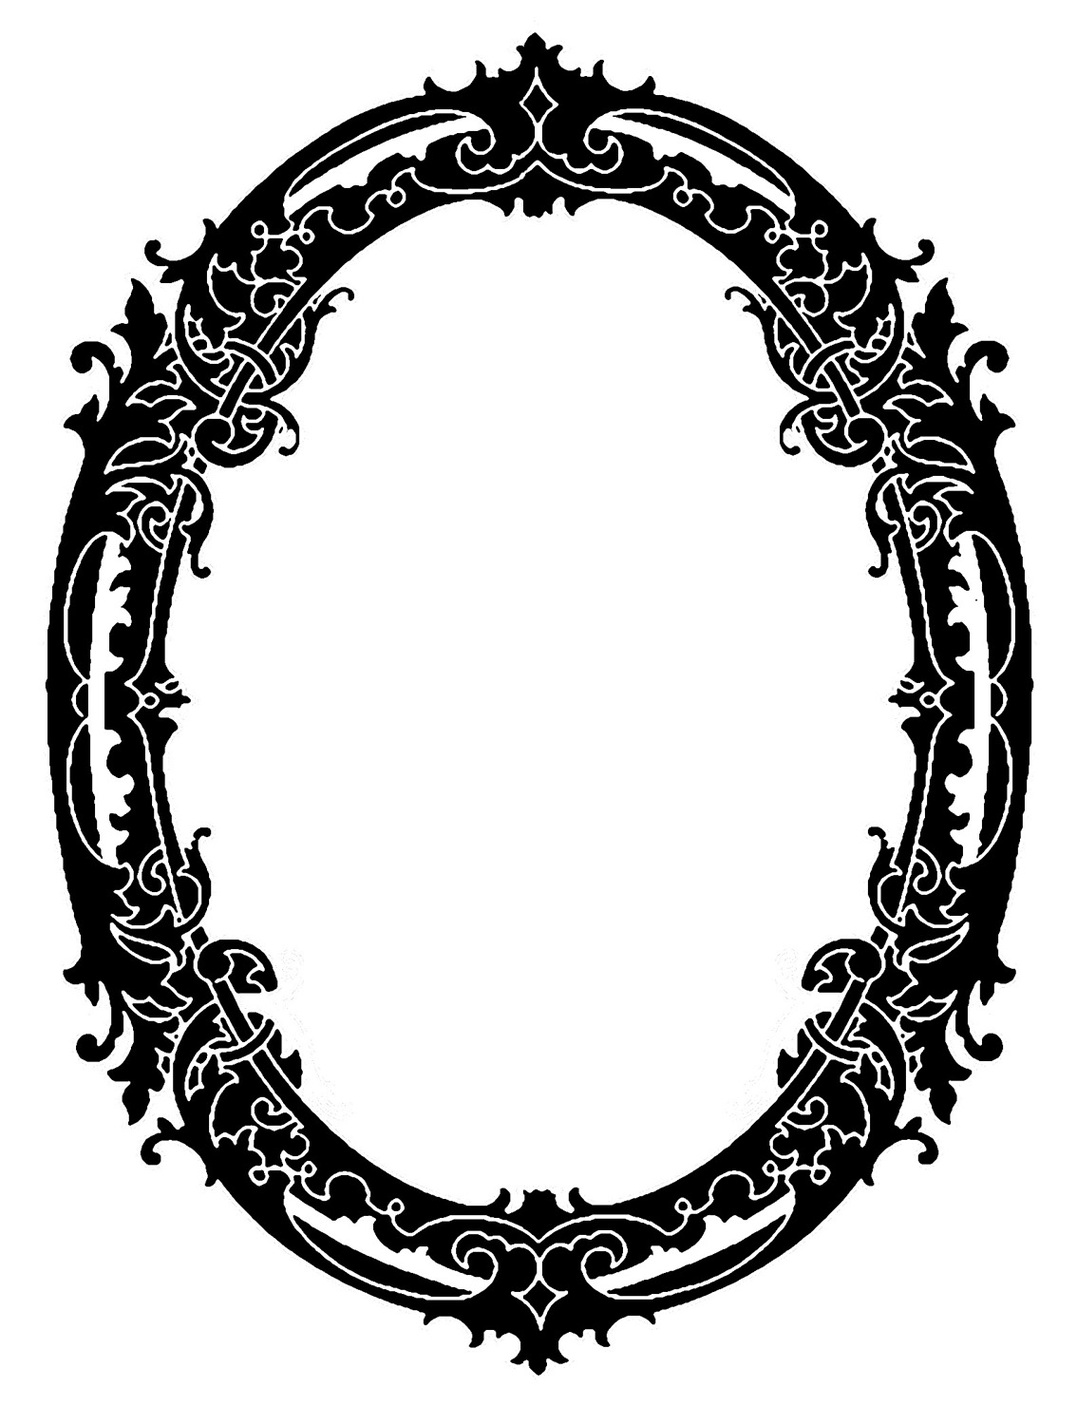 Vintage Oval Frame Vector Clipart - Free to use Clip Art Resource